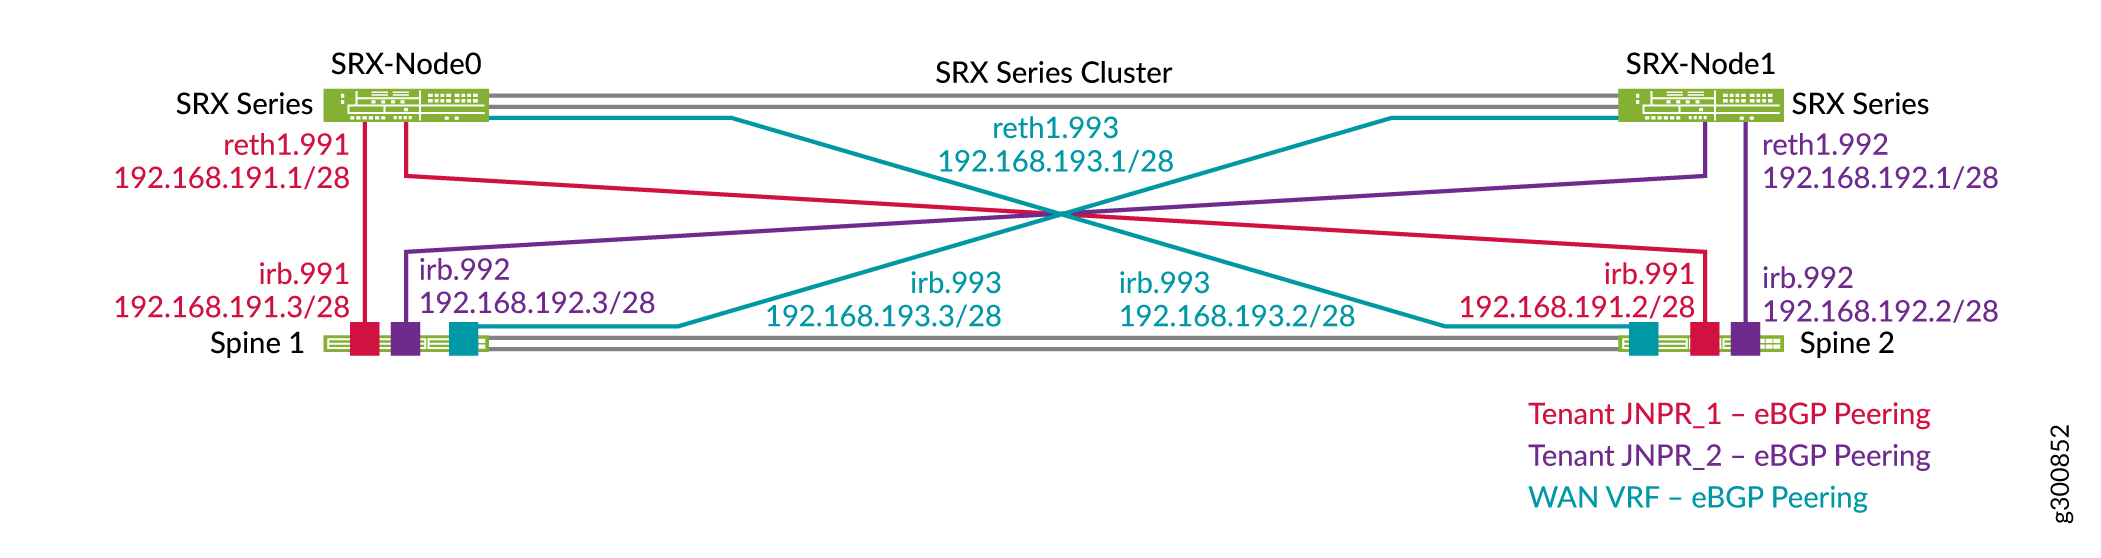 SRX Chassis Cluster EBGP Peering Topology